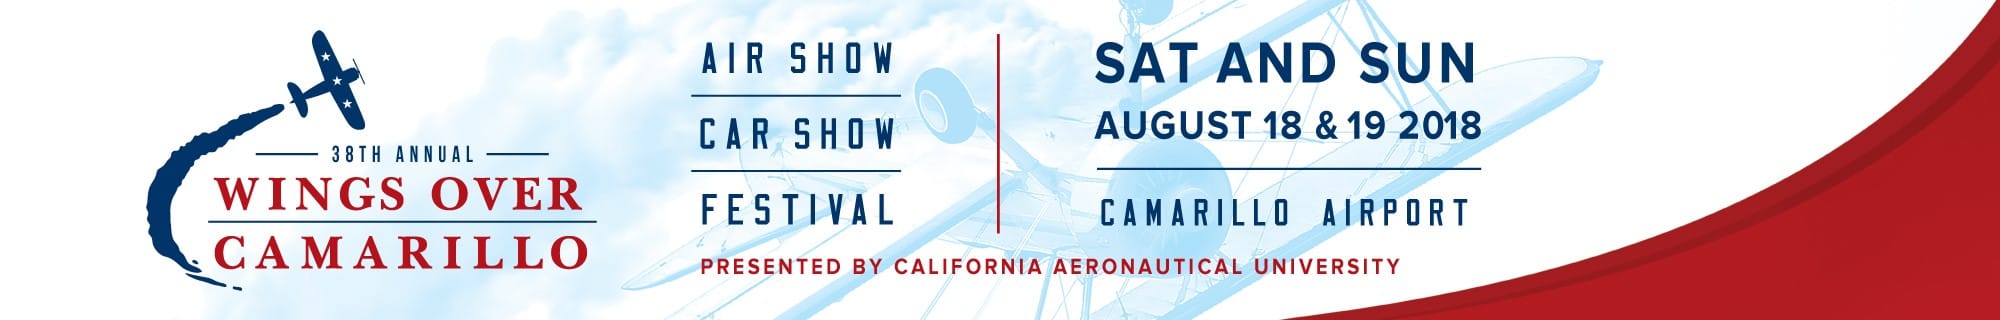 2018 Wings Over Camarillo Air Show